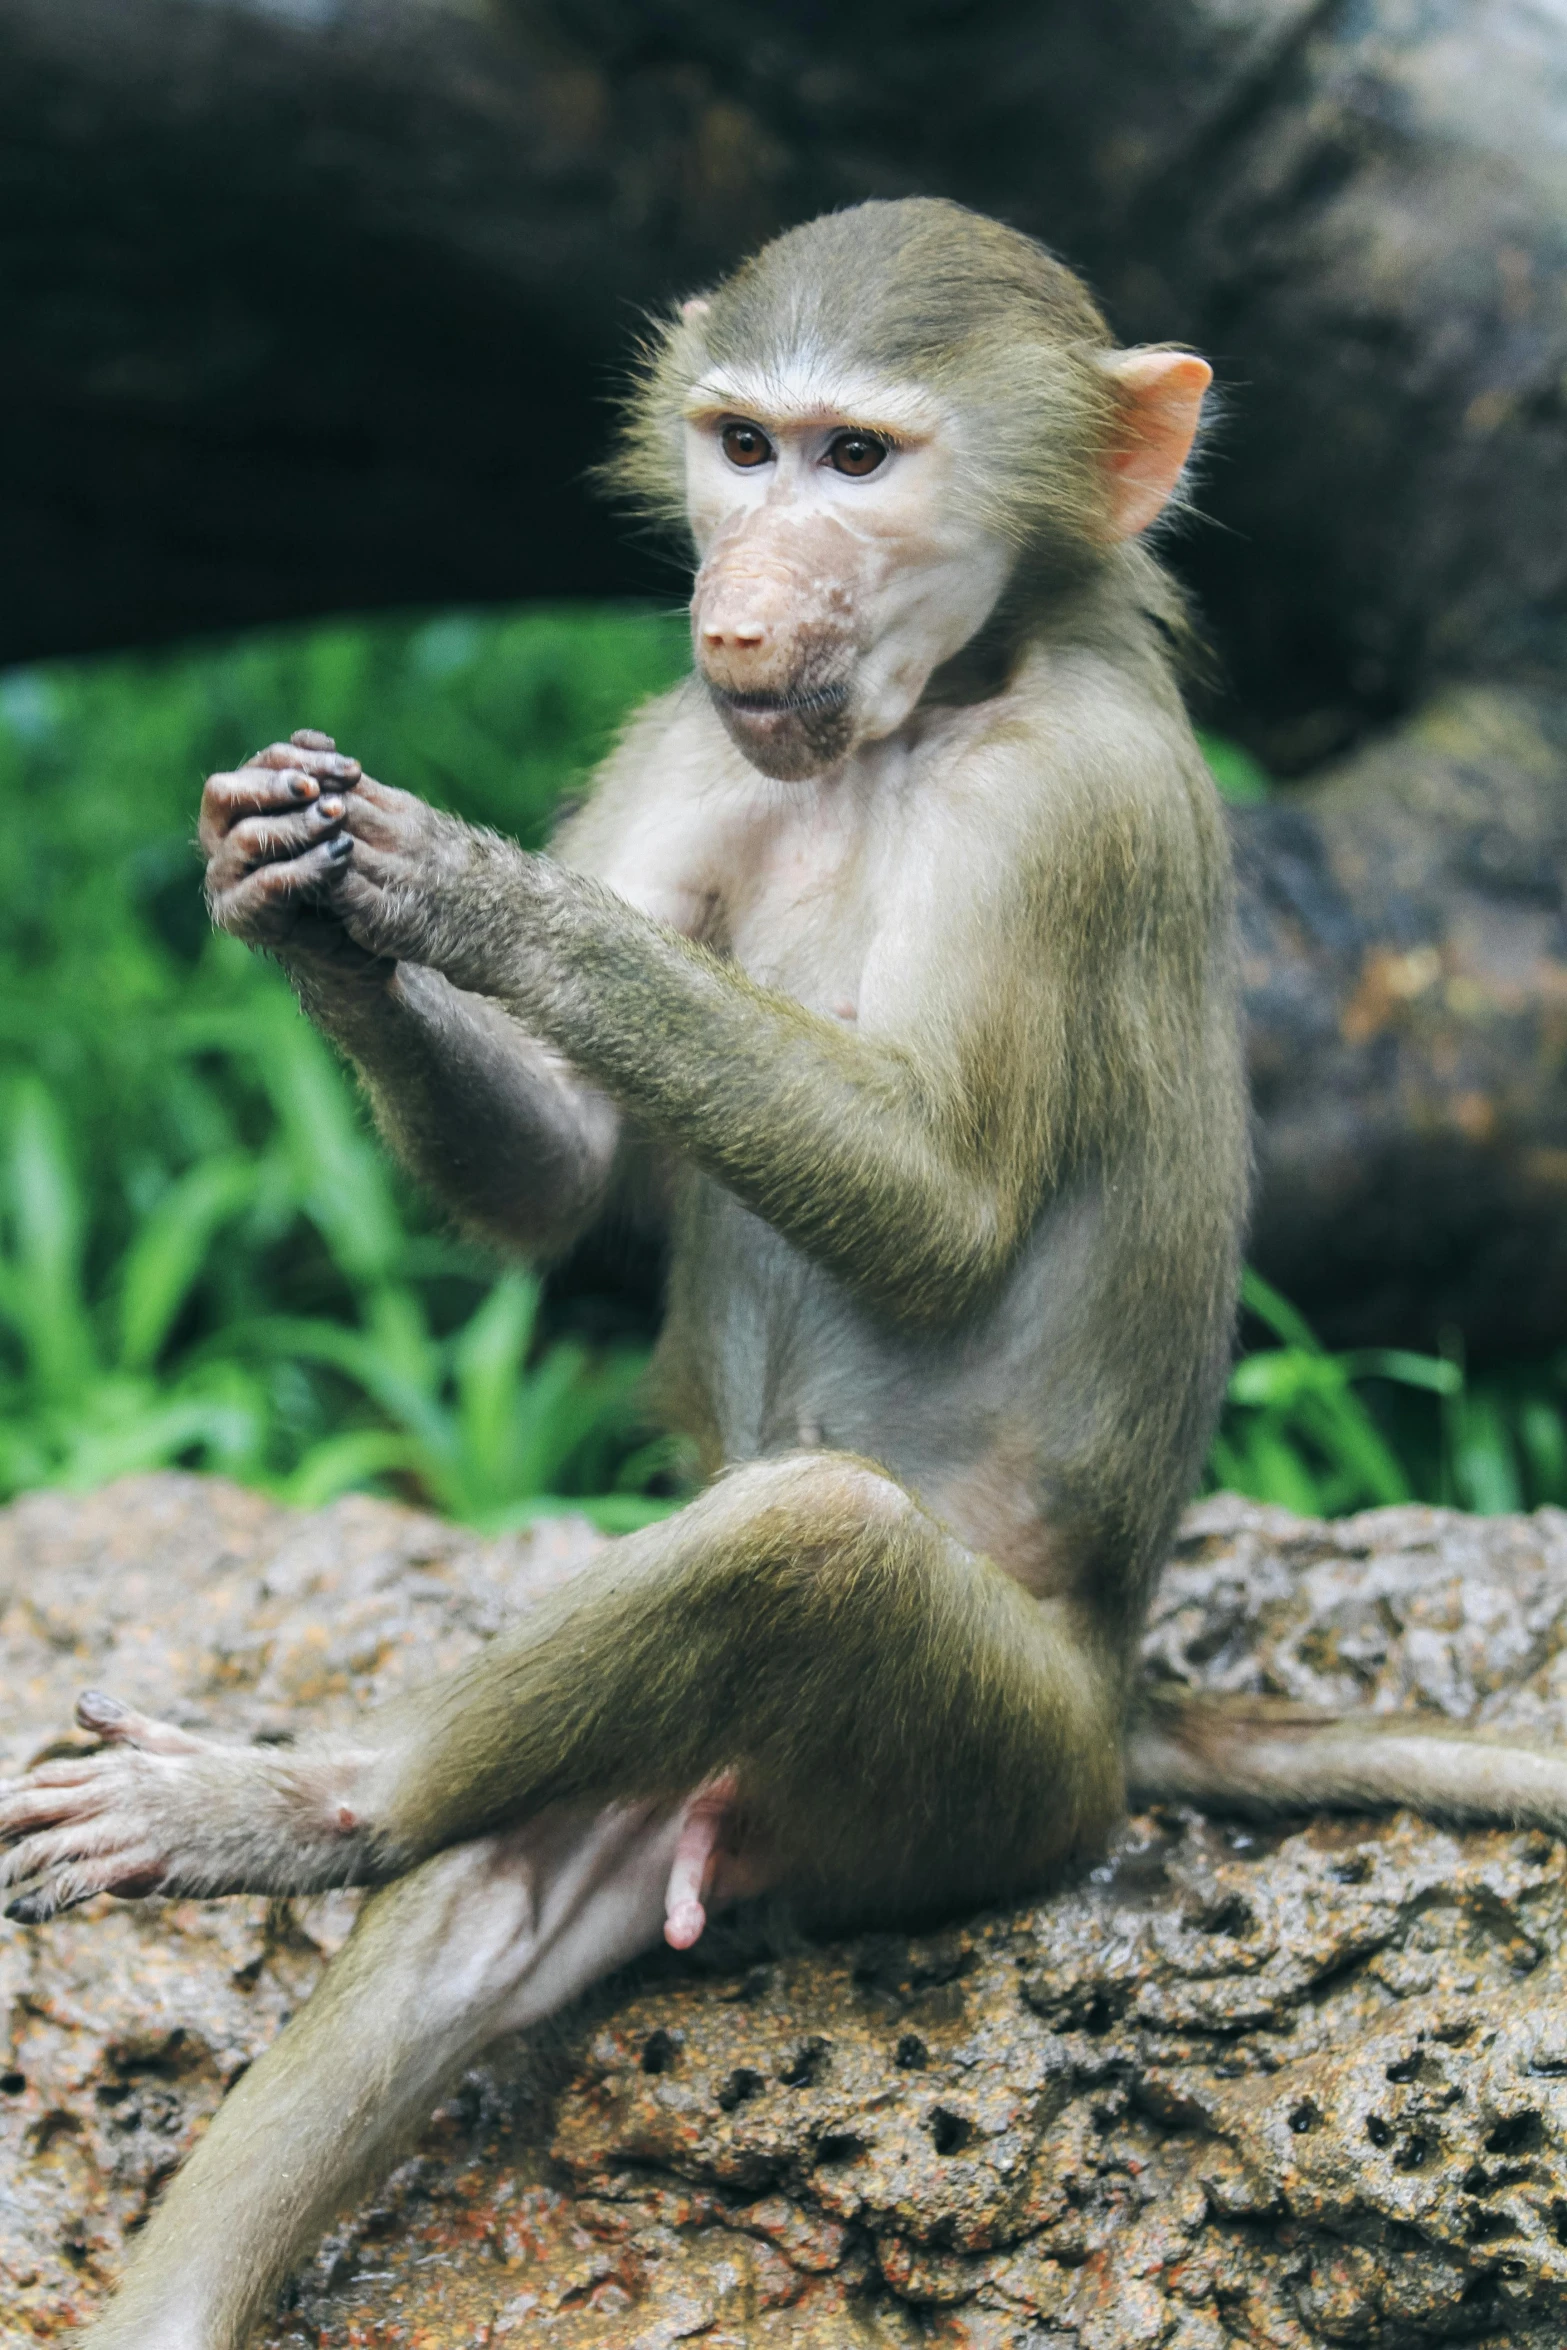 a young monkey with hand up in front of a fallen log